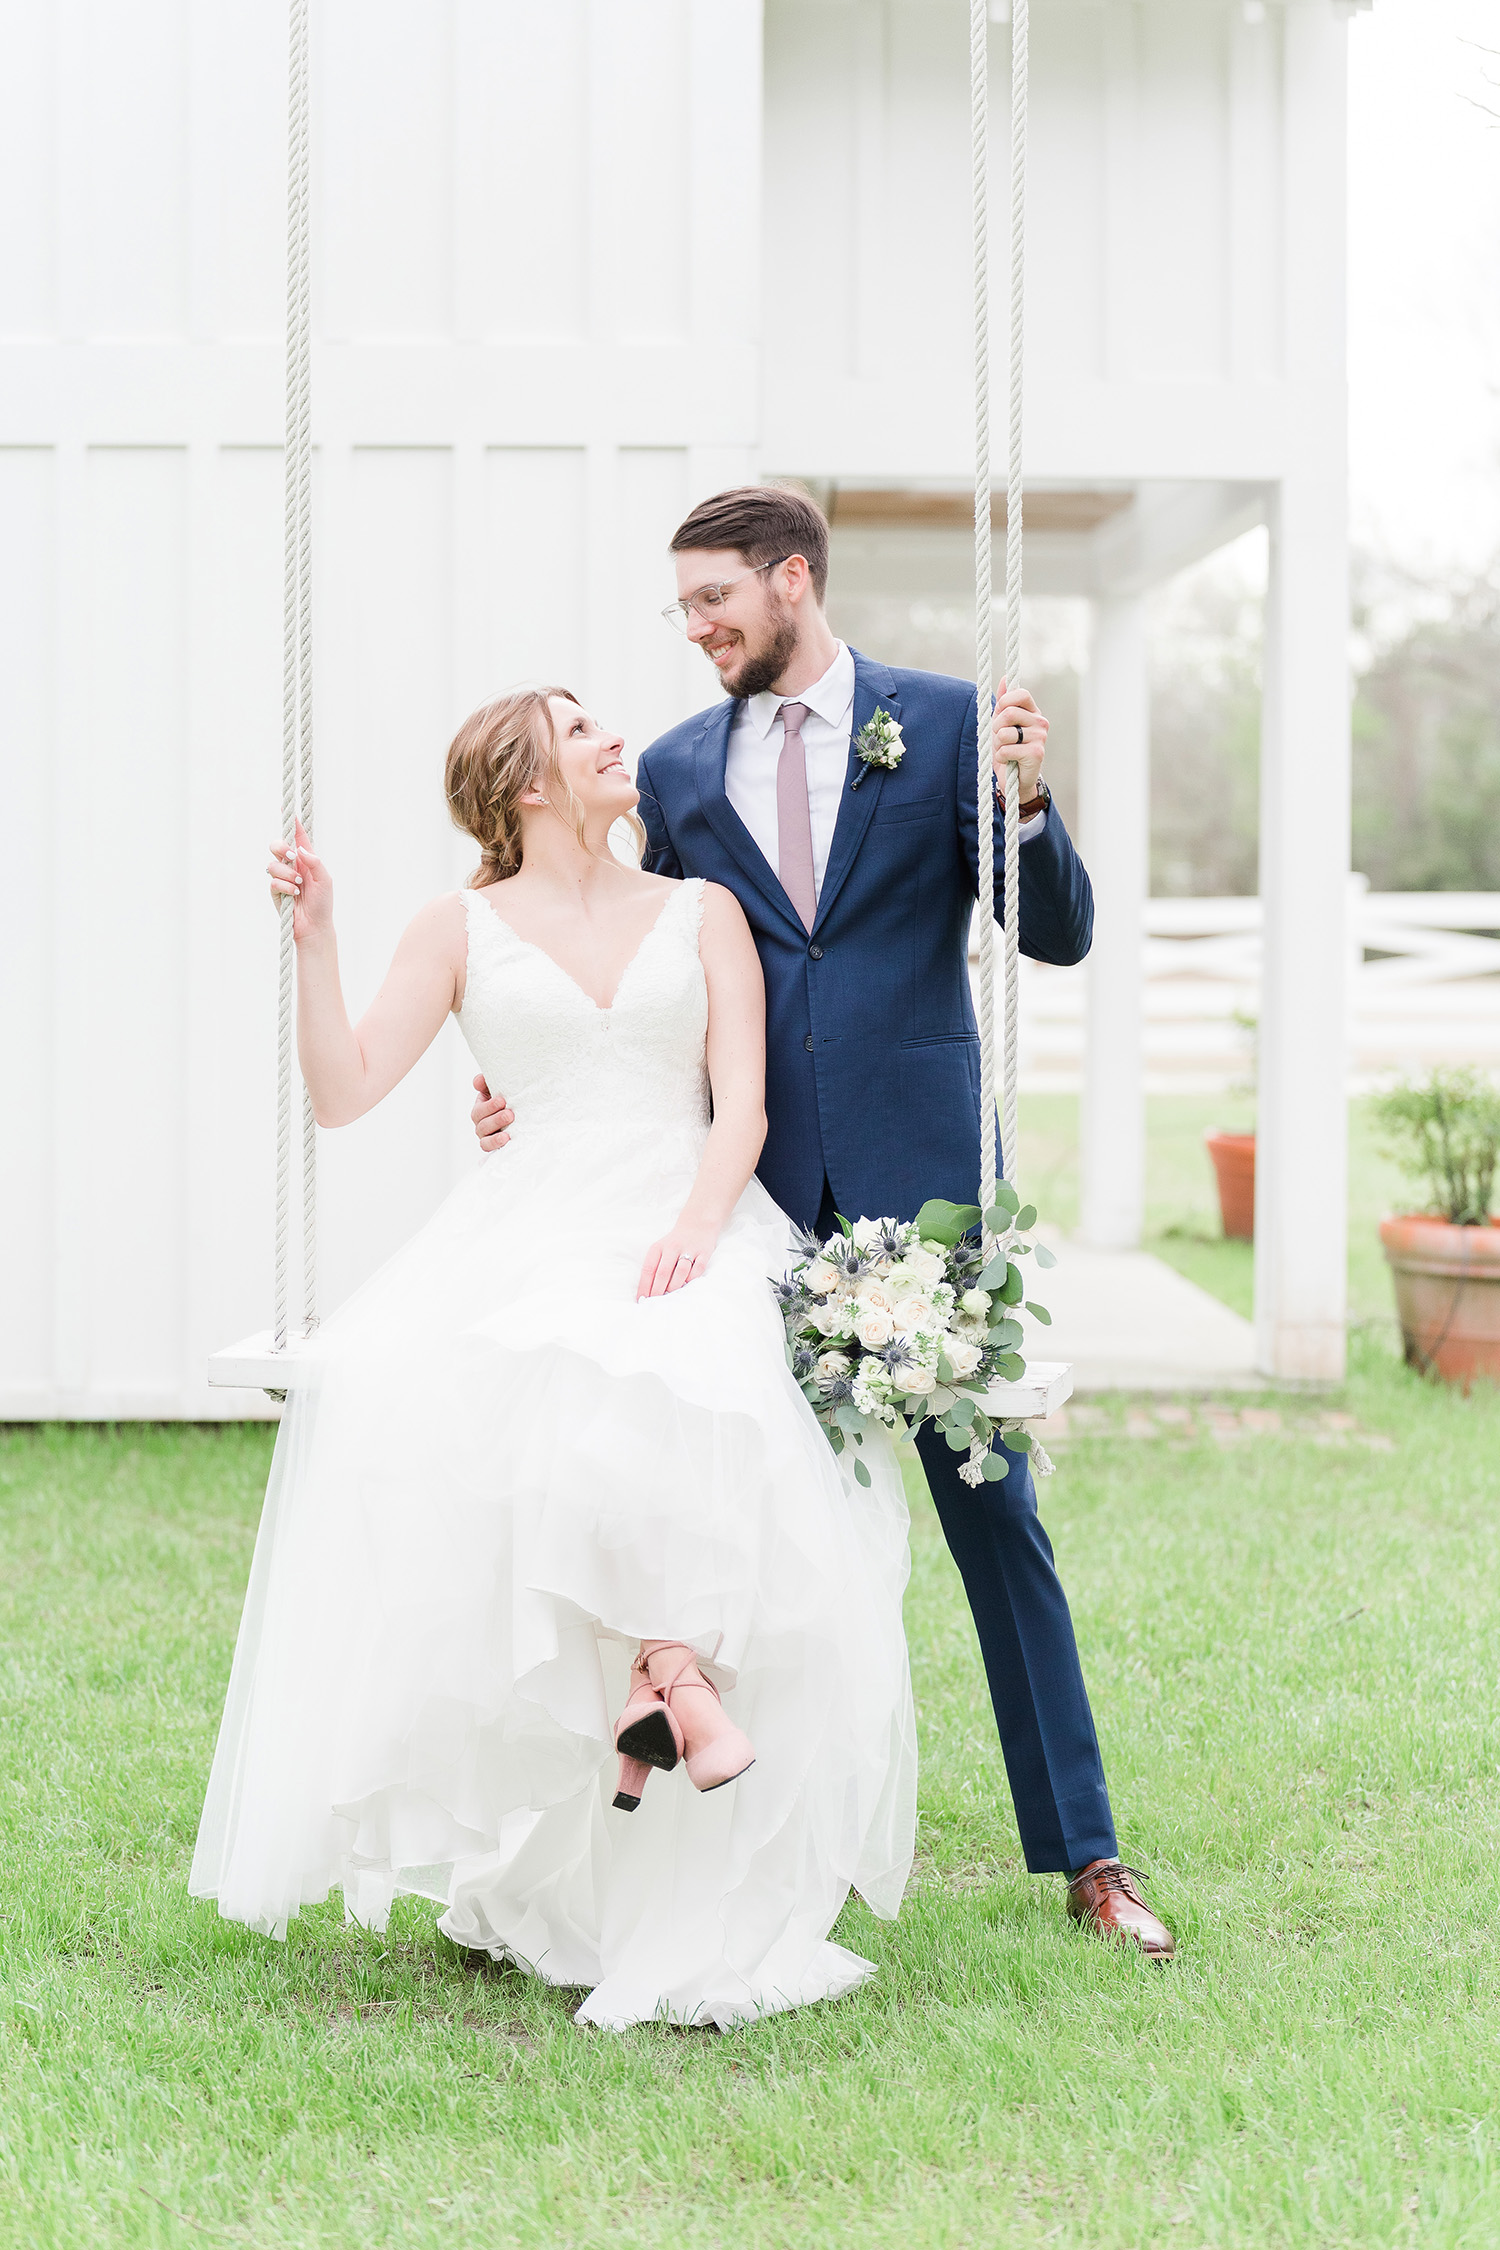 Bride and groom on swing wedding day